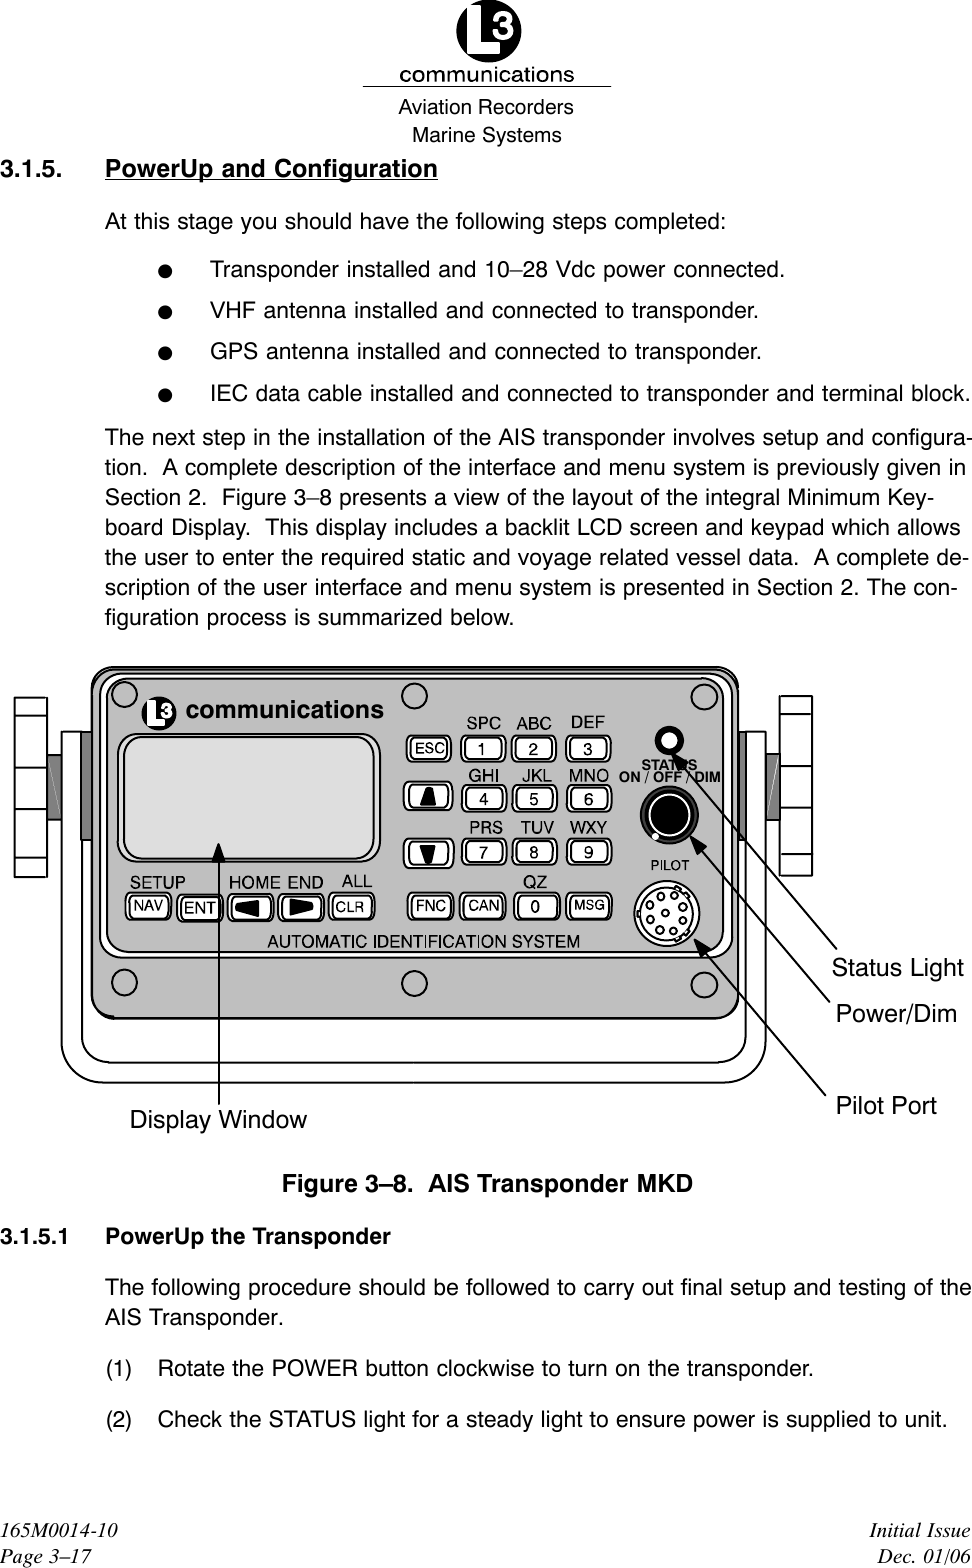 Marine SystemsAviation RecordersInitial IssueDec. 01/06165M0014-10Page 3–173.1.5. PowerUp and ConfigurationAt this stage you should have the following steps completed:FTransponder installed and 10–28 Vdc power connected.FVHF antenna installed and connected to transponder.FGPS antenna installed and connected to transponder.FIEC data cable installed and connected to transponder and terminal block.The next step in the installation of the AIS transponder involves setup and configura-tion.  A complete description of the interface and menu system is previously given inSection 2.  Figure 3–8 presents a view of the layout of the integral Minimum Key-board Display.  This display includes a backlit LCD screen and keypad which allowsthe user to enter the required static and voyage related vessel data.  A complete de-scription of the user interface and menu system is presented in Section 2. The con-figuration process is summarized below.communicationsPower/DimStatus LightPilot PortDisplay WindowSTATUSON / OFF / DIMFigure 3–8.  AIS Transponder MKD3.1.5.1 PowerUp the TransponderThe following procedure should be followed to carry out final setup and testing of theAIS Transponder.(1) Rotate the POWER button clockwise to turn on the transponder.(2) Check the STATUS light for a steady light to ensure power is supplied to unit.